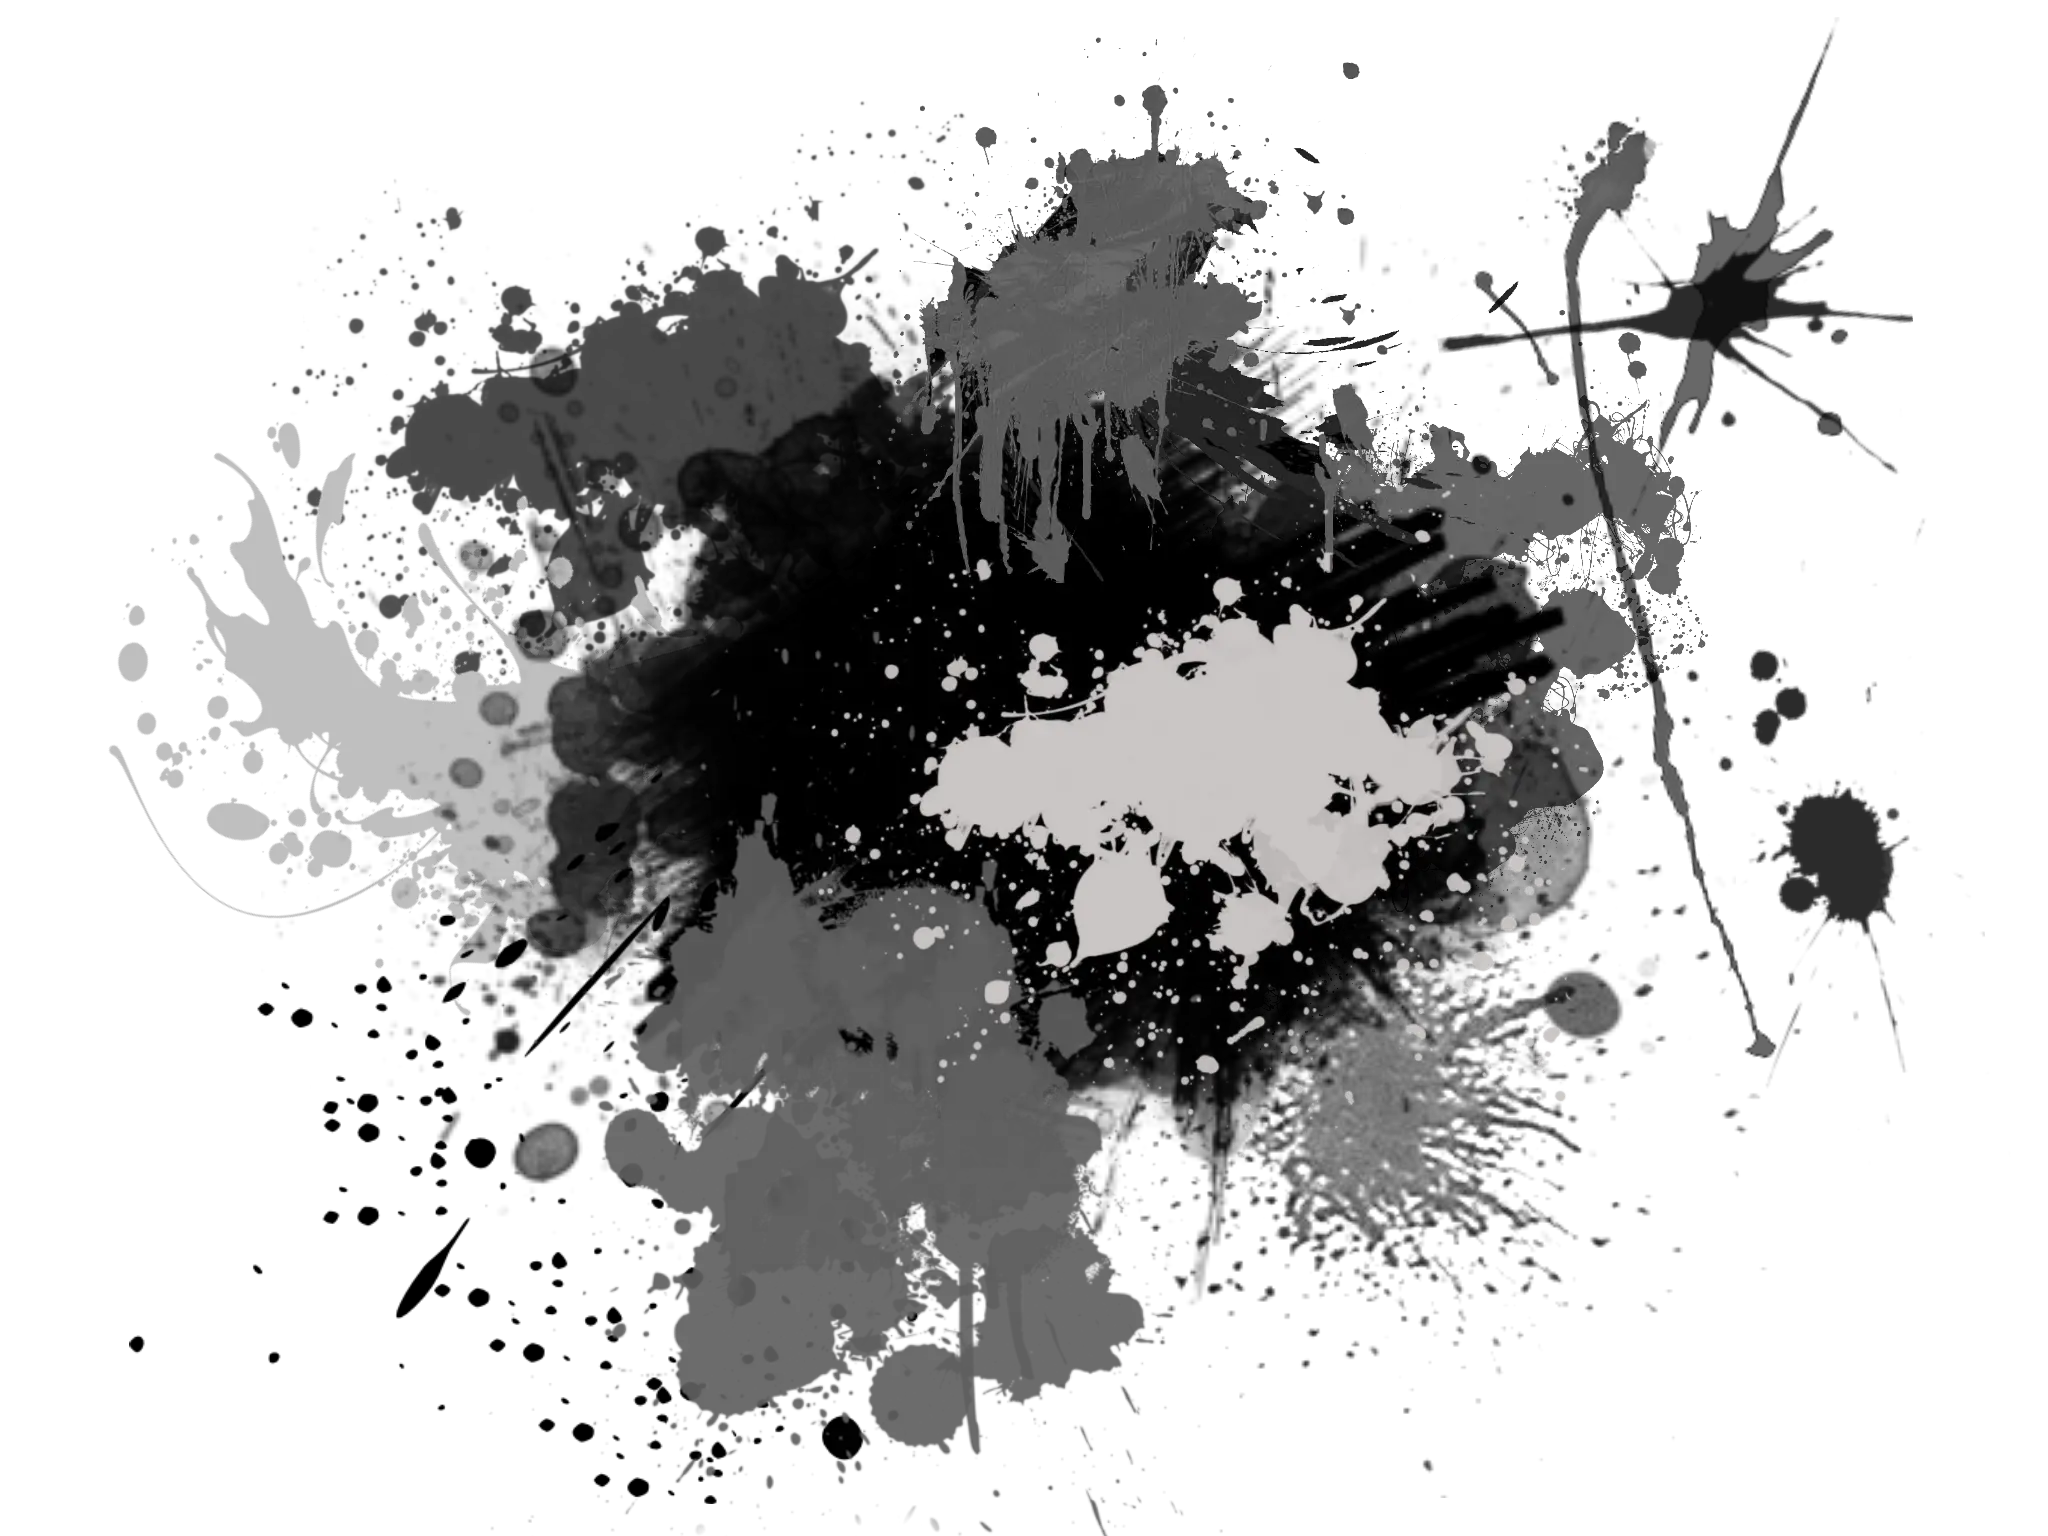 A set of achromatic ink splotches. - generated using Stable Diffusion